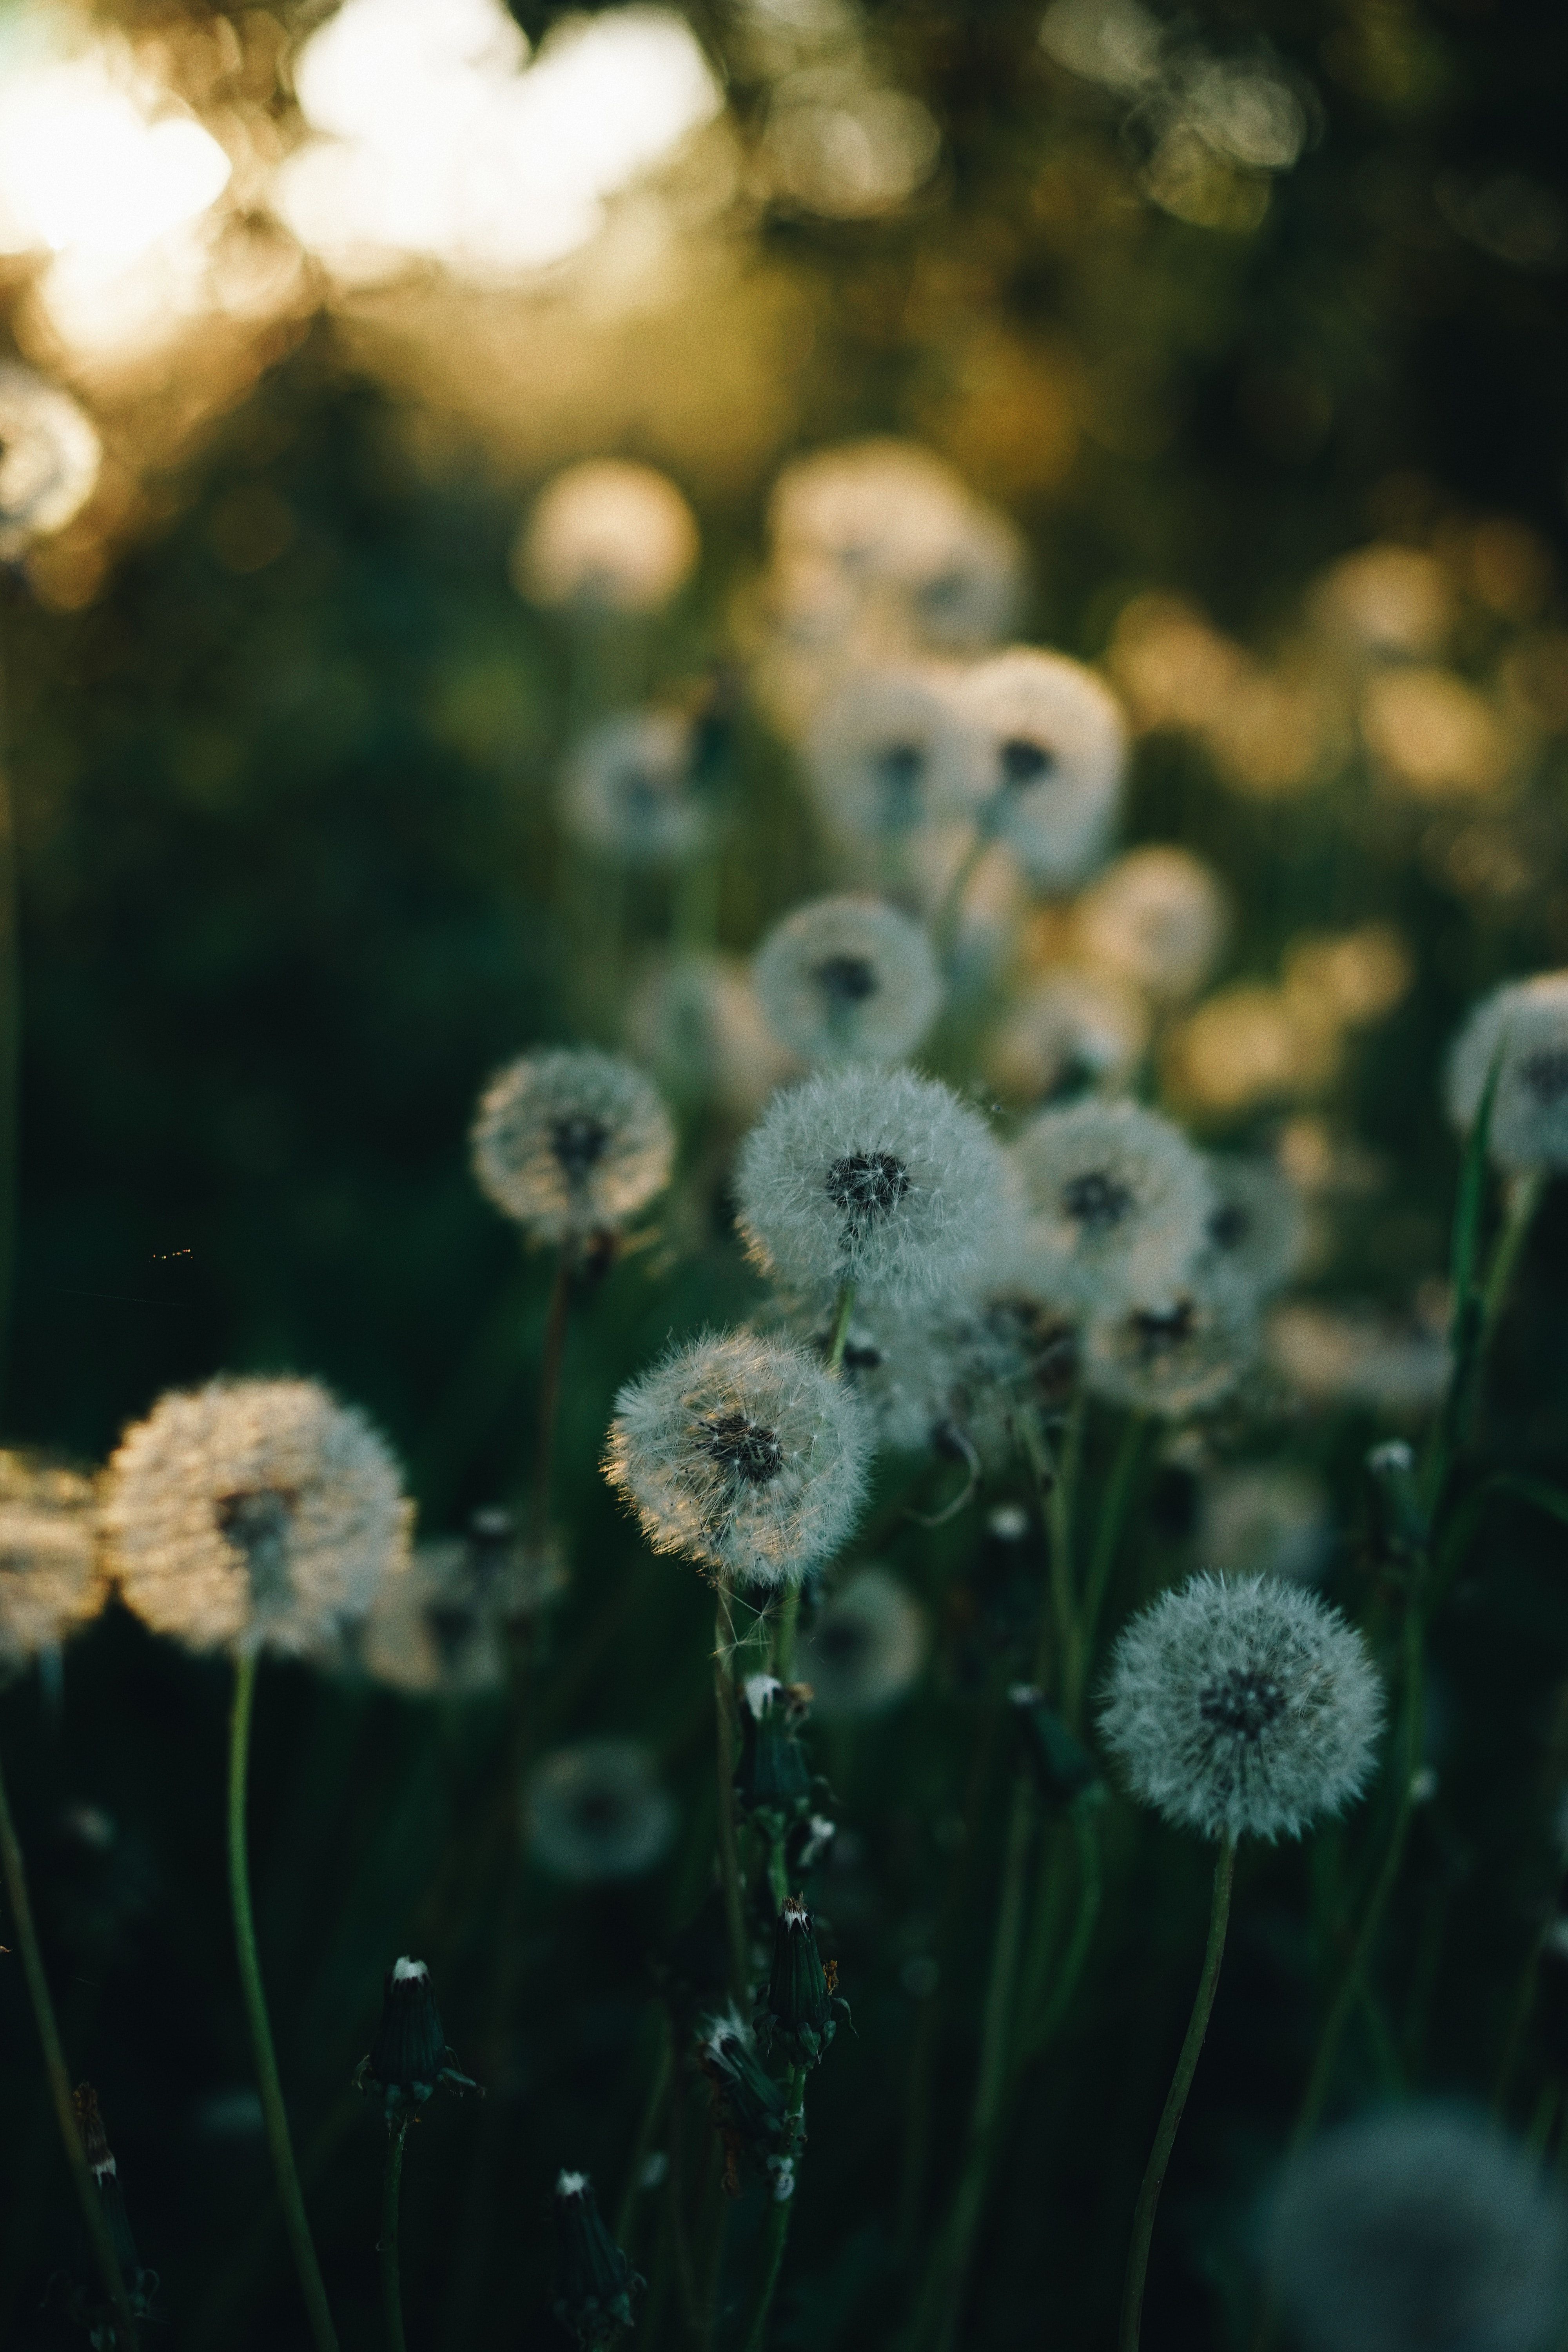 Close Up Photograph Of Dandelions · Free